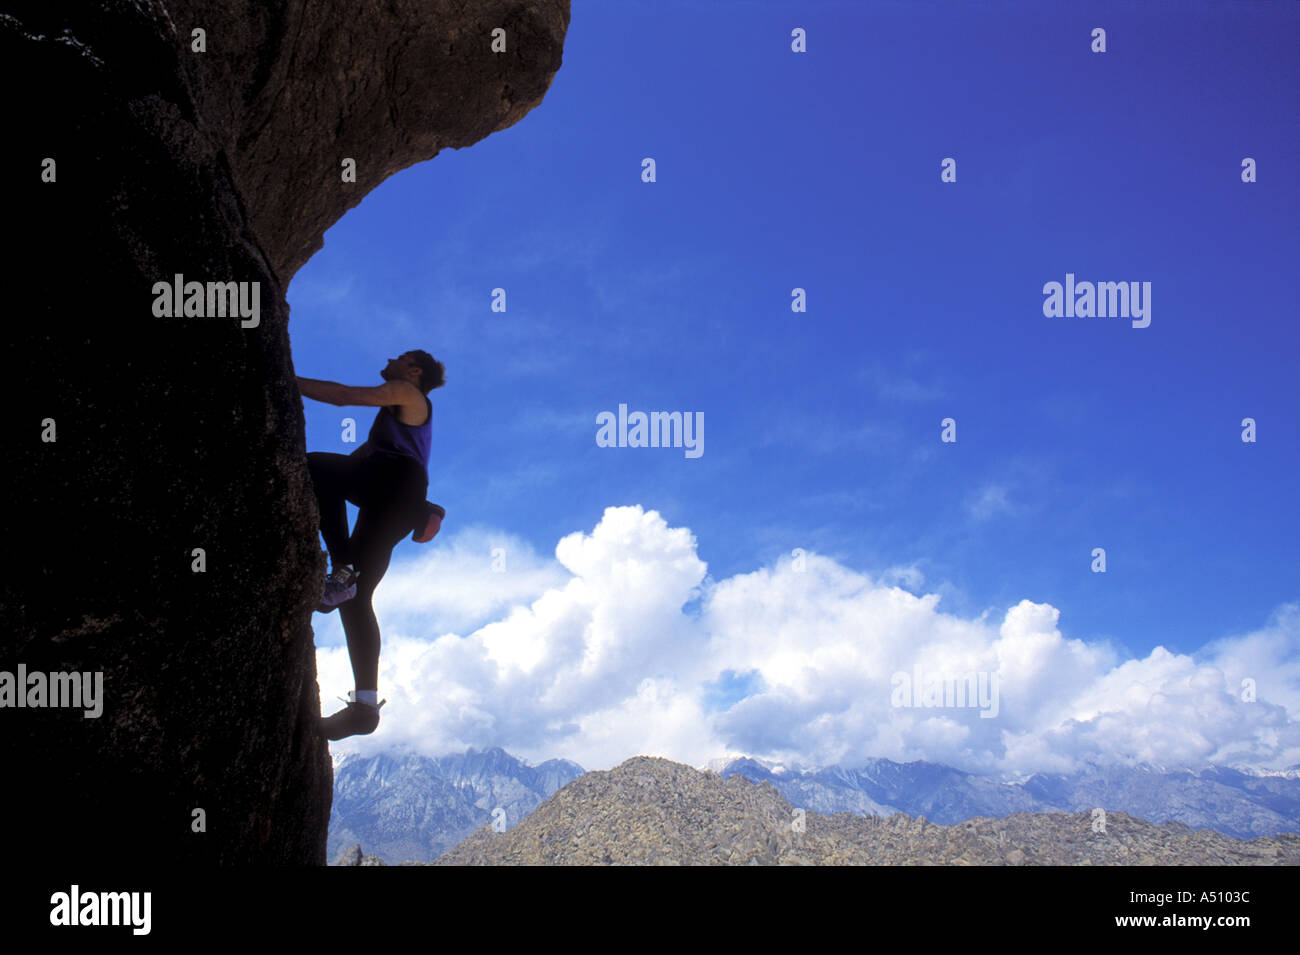 Silhouette of lone man rock climbing up vertical surface Stock Photo